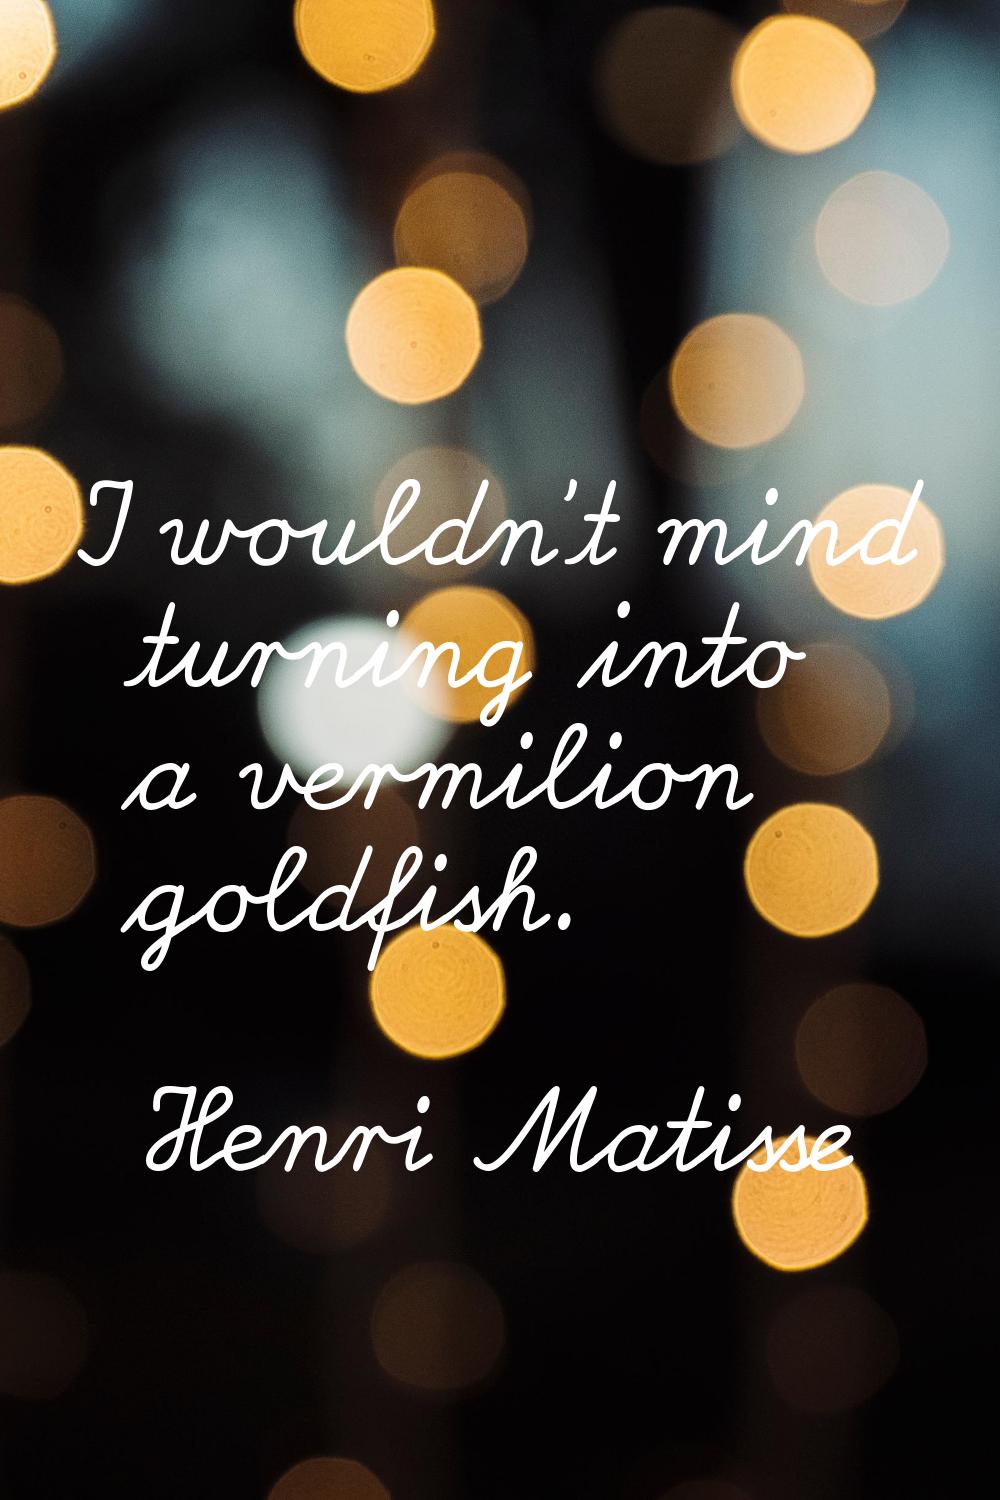 I wouldn't mind turning into a vermilion goldfish.